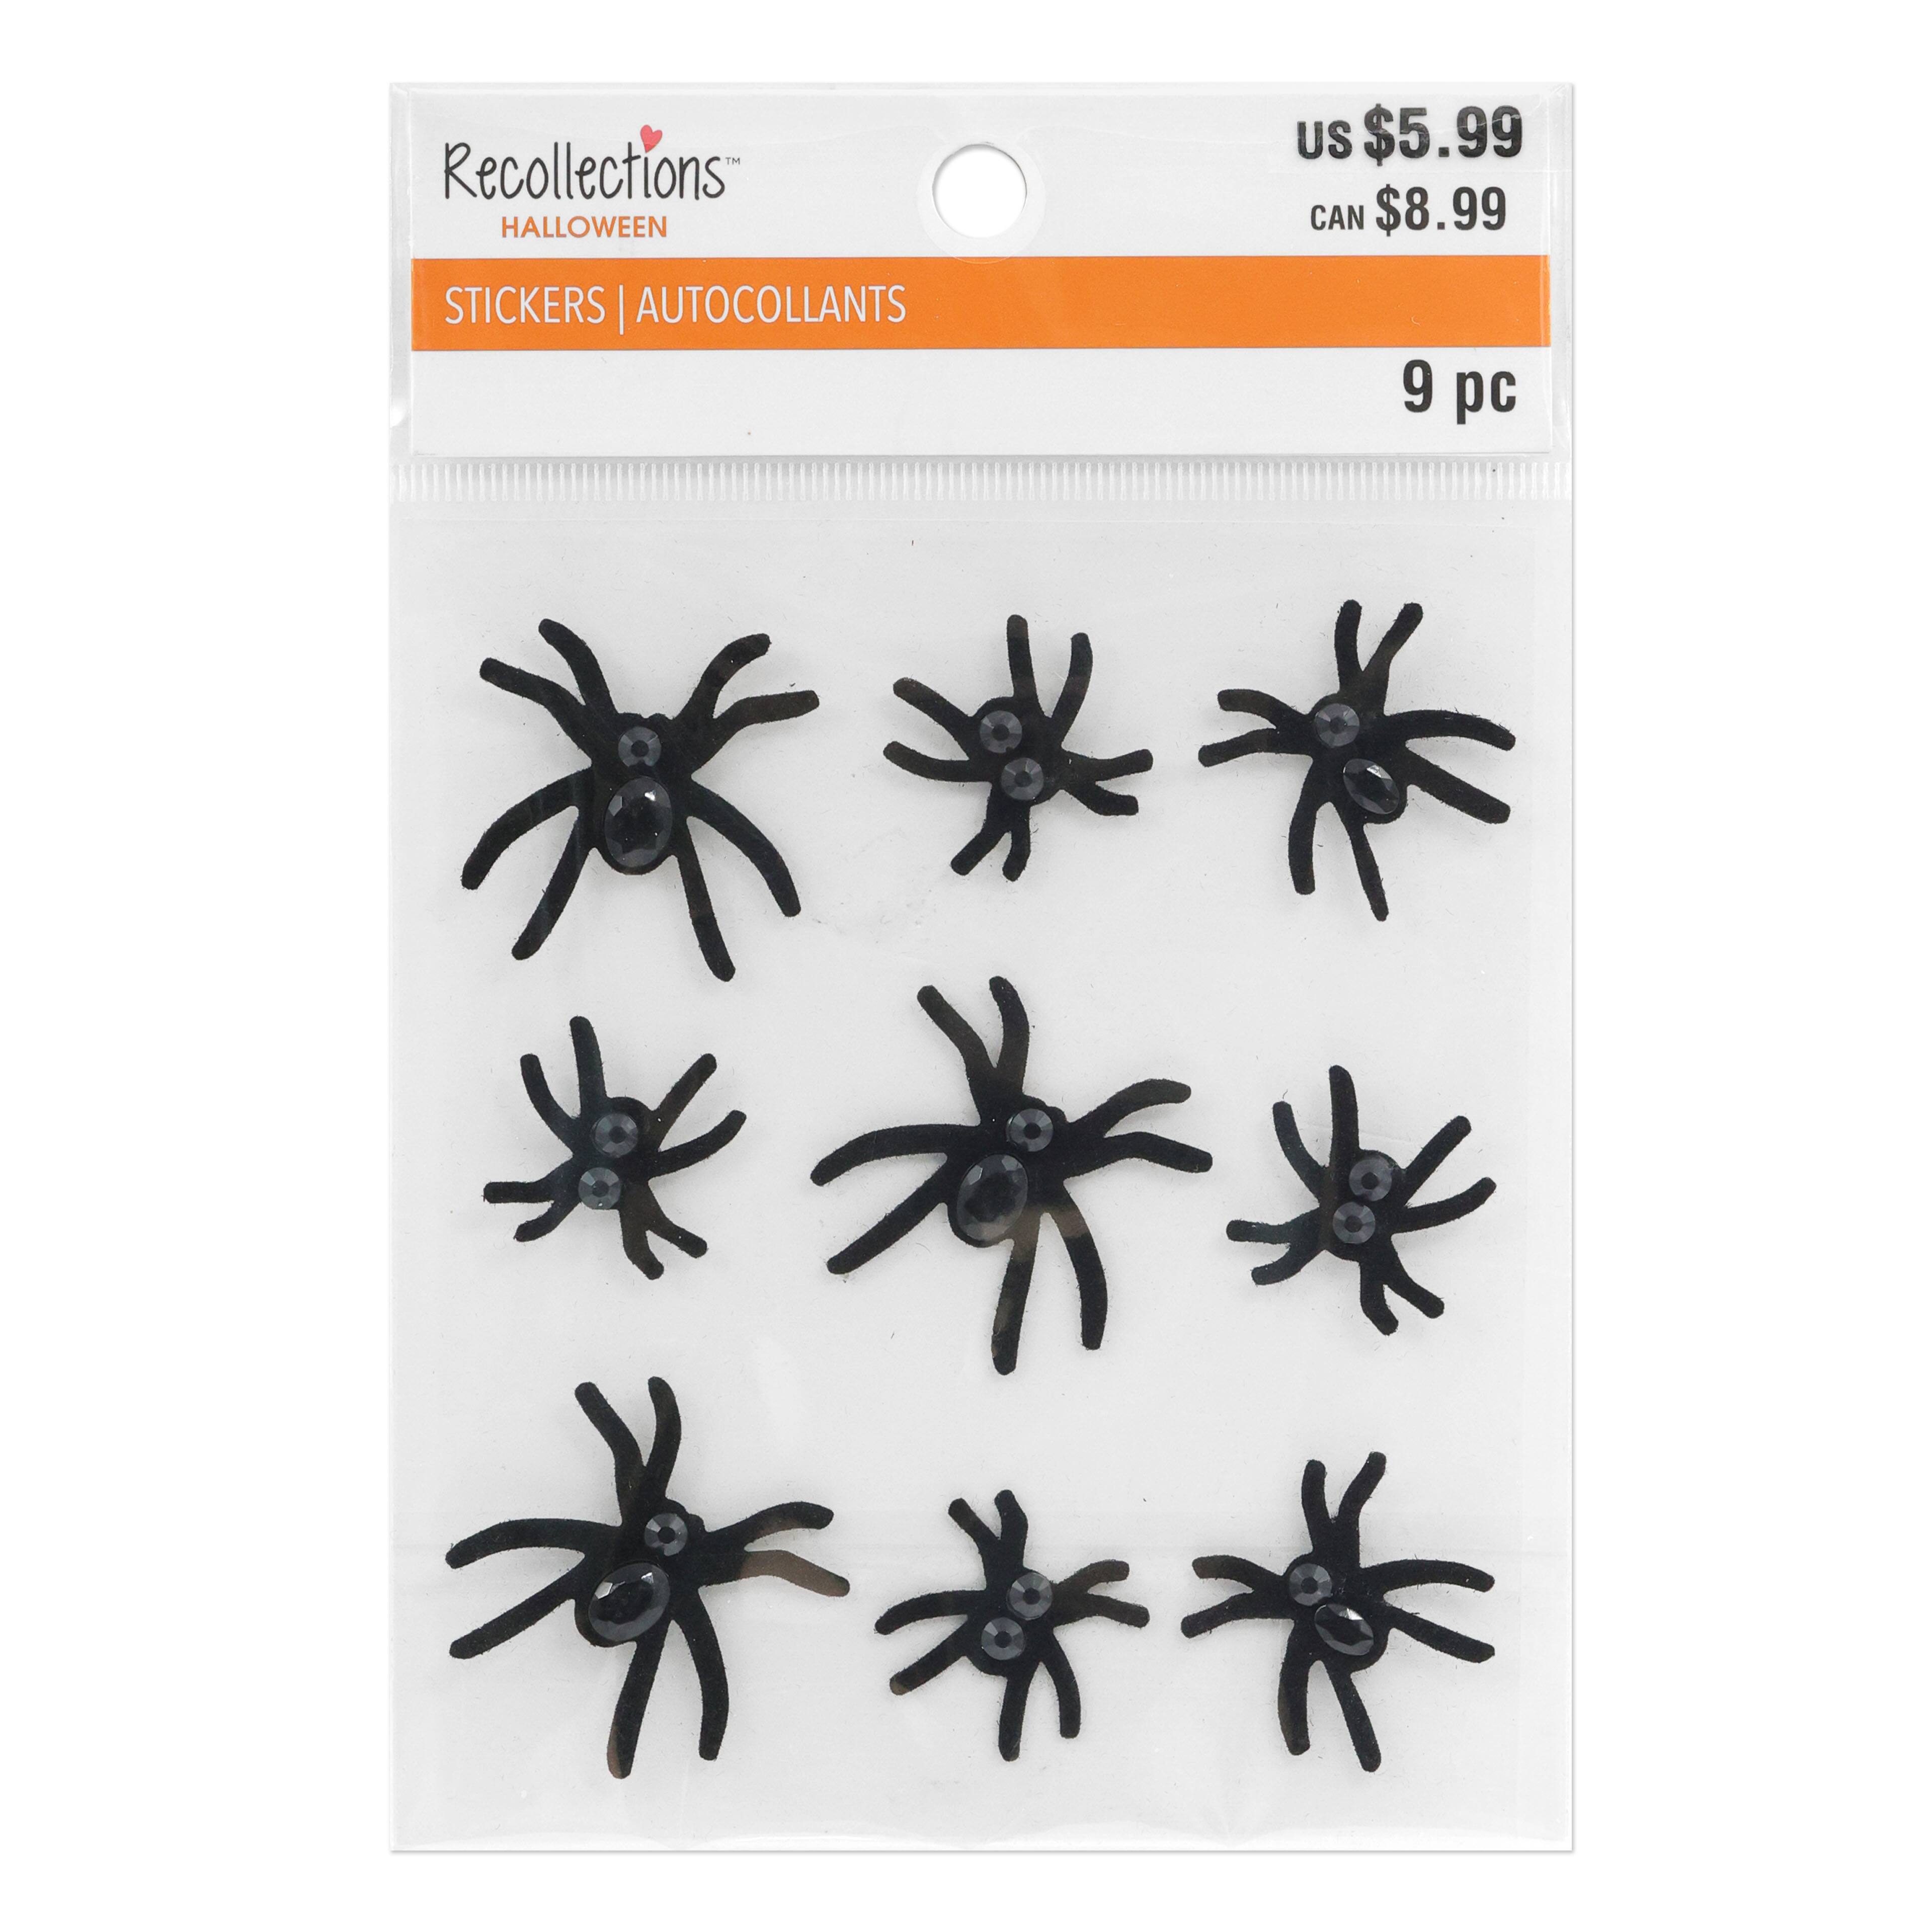 HALLOWEEN RECOLLECTIONS DIECUTS SPIDERS 